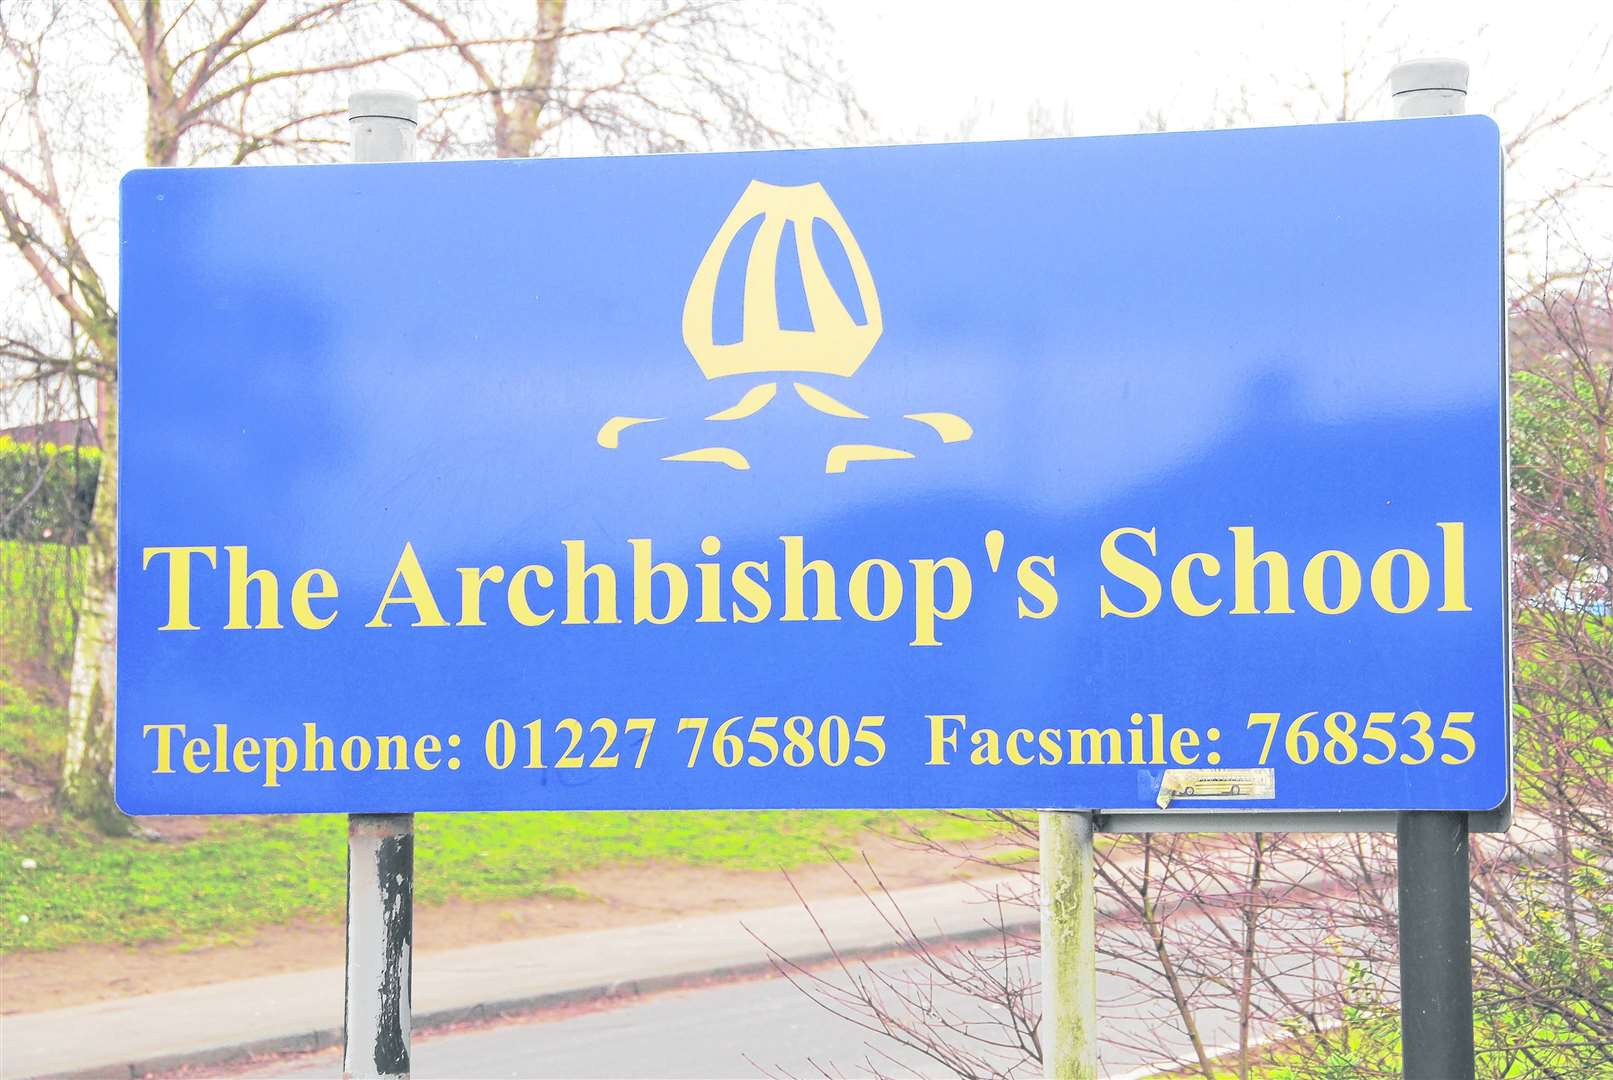 Mr Howe was sacked from Archbishop's in October 2019